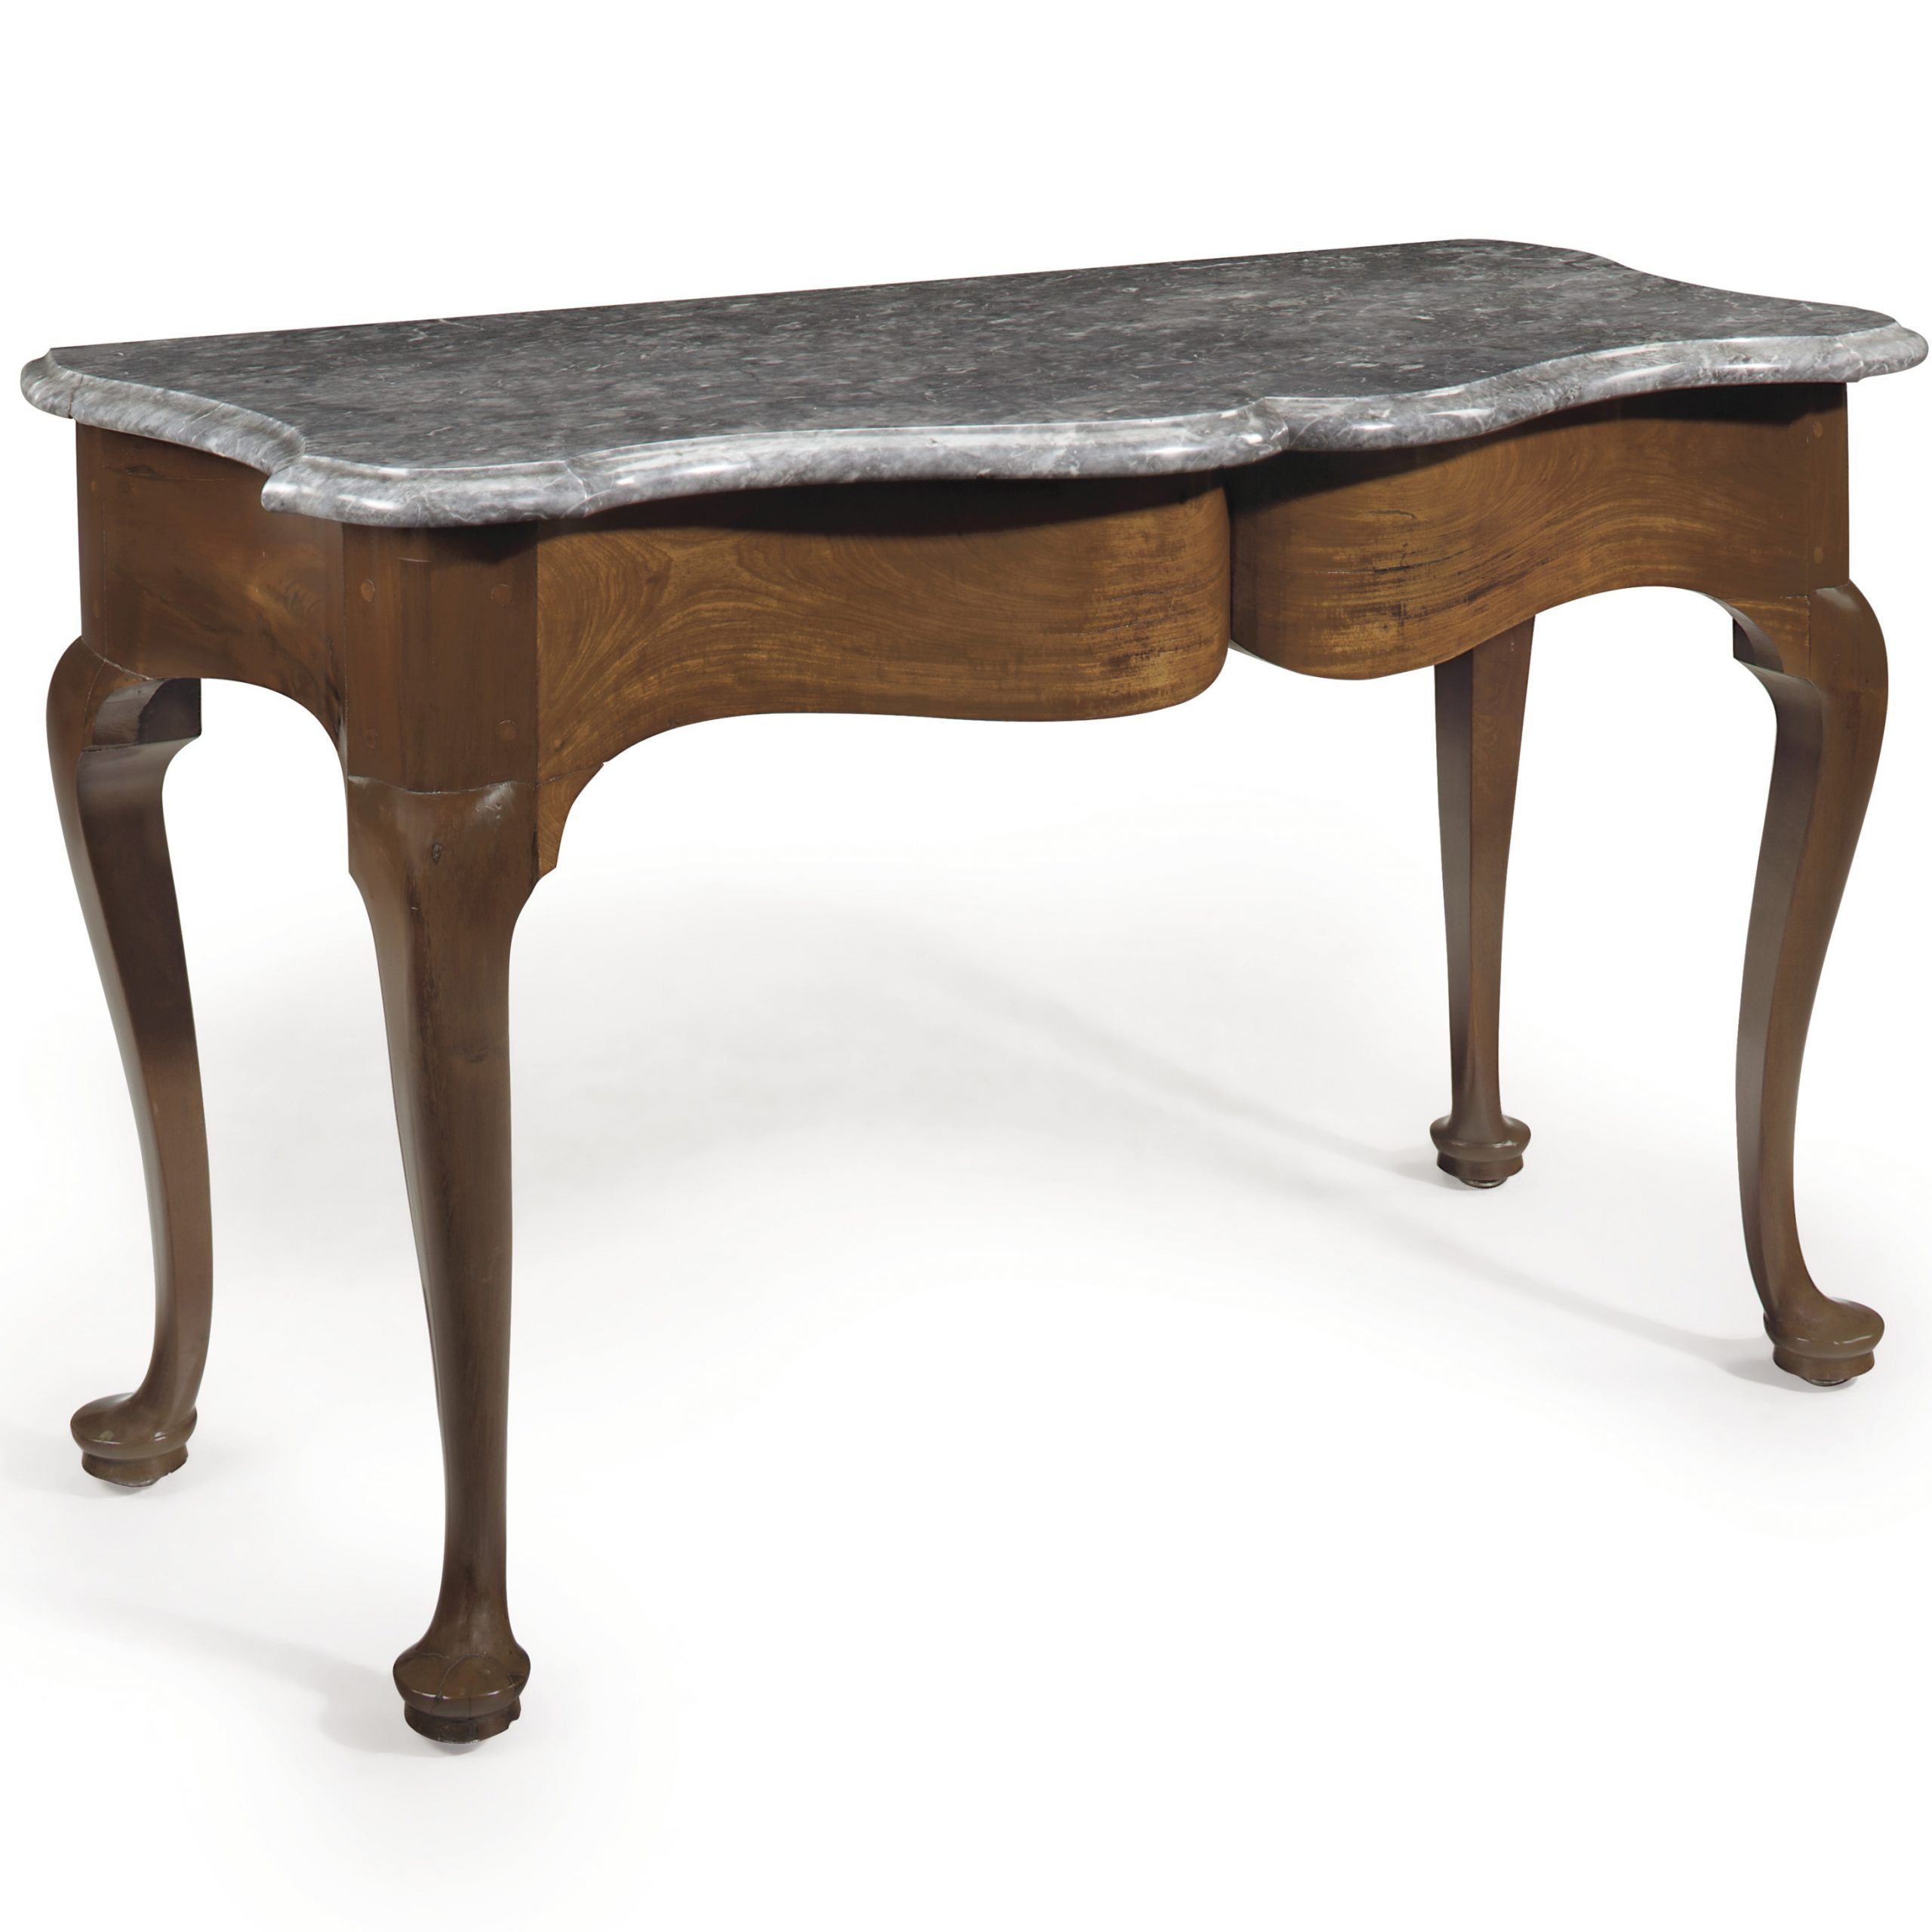 The Captain Anthony Low Queen Anne Mahogany Marble Slab Pertaining To Newest Christie Round Marble Dining Tables (View 19 of 25)